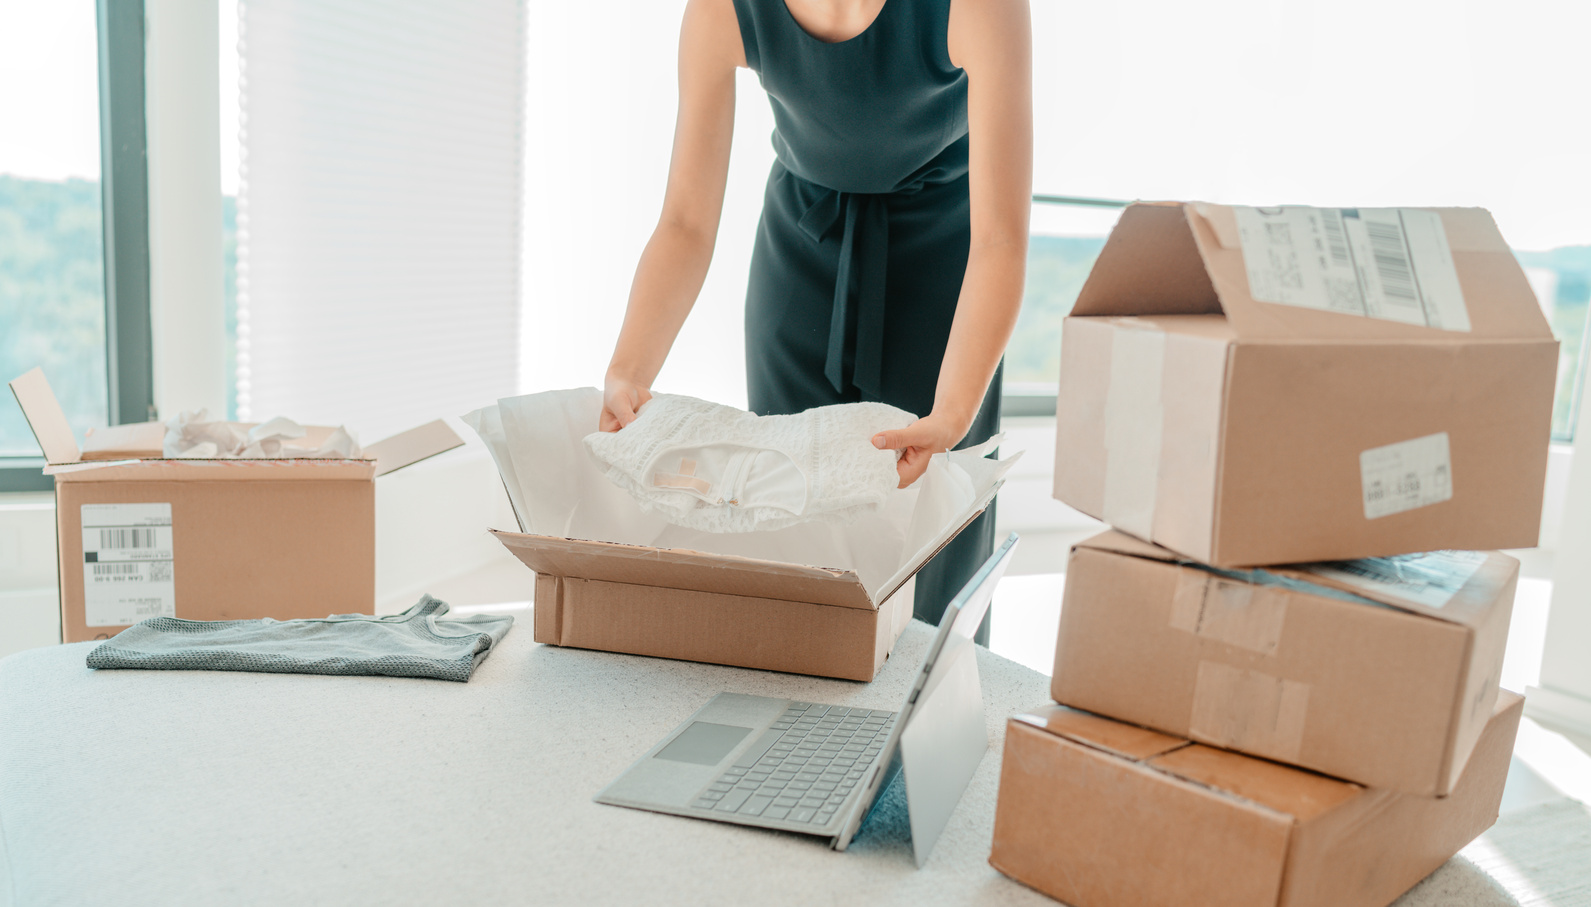 Selling Clothing from Home. Small Business Entrepreneur Woman Packing Dress Clothes in Mailing Box for Shipping from Online Store